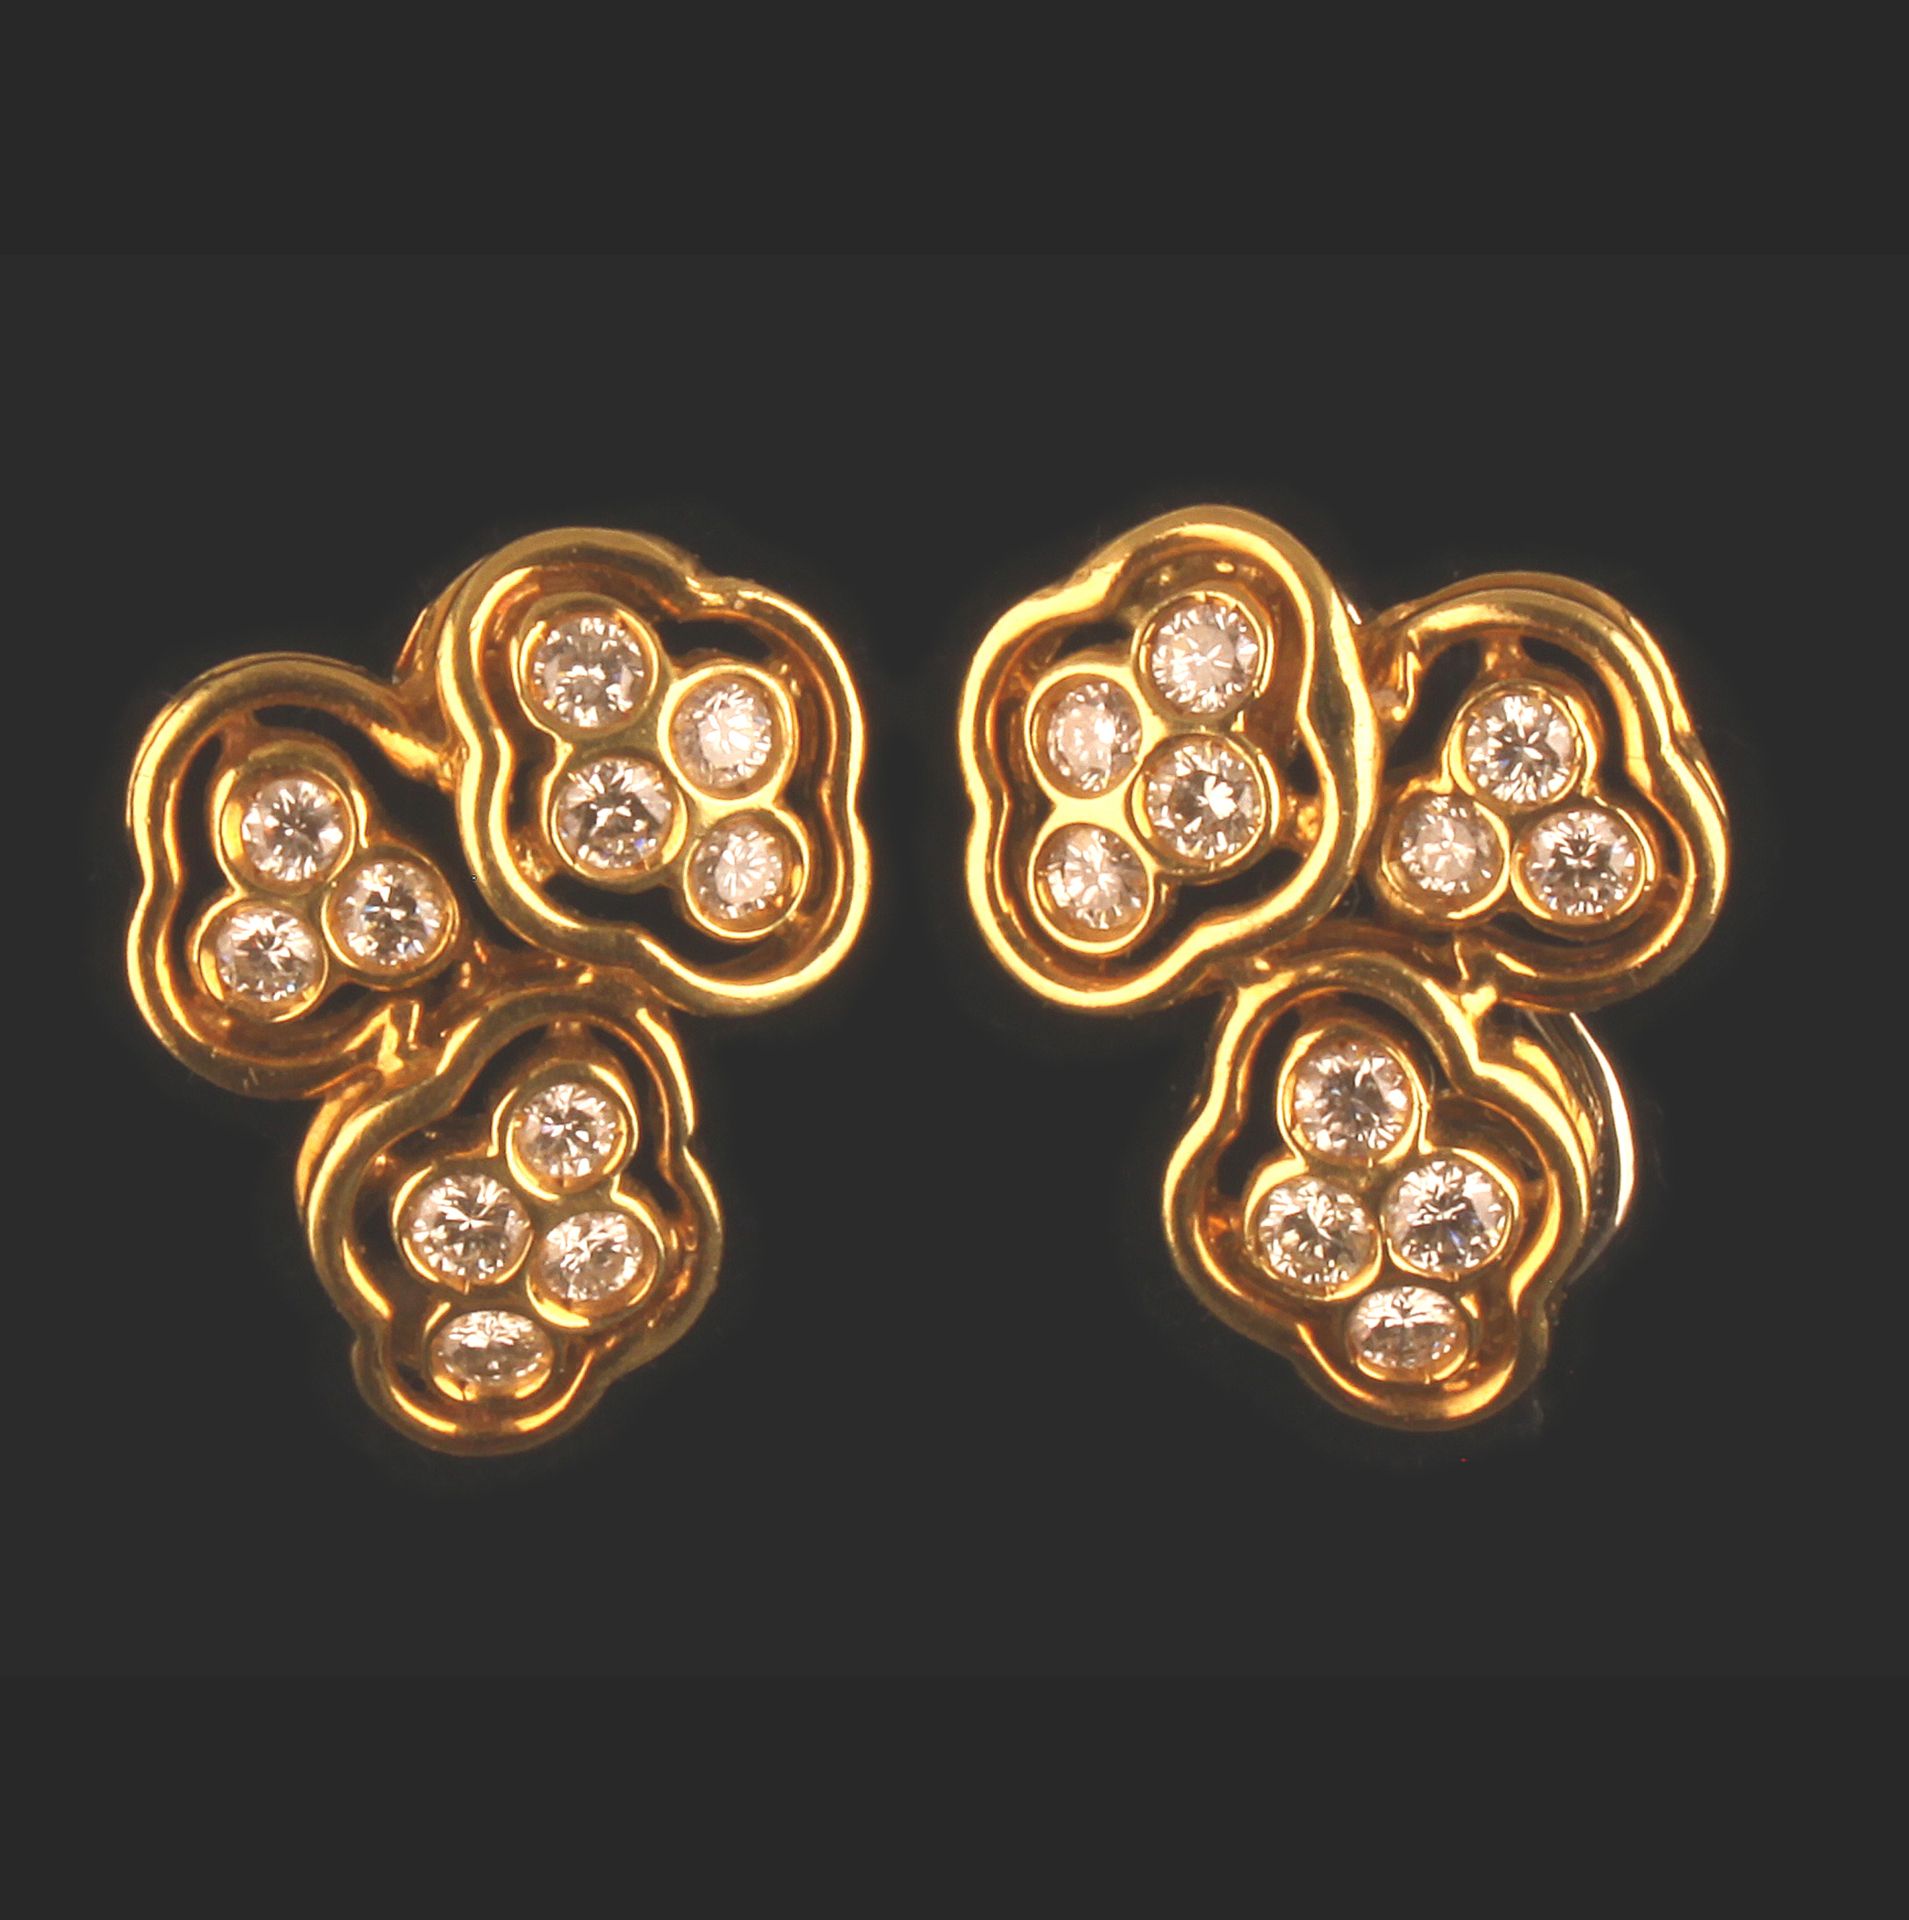 18ct YELLOW GOLD EARRINGS 1.10cts OF HIGH QUALITY DIAMONDS VS CLARITY & E/F COLOUR - Image 4 of 6